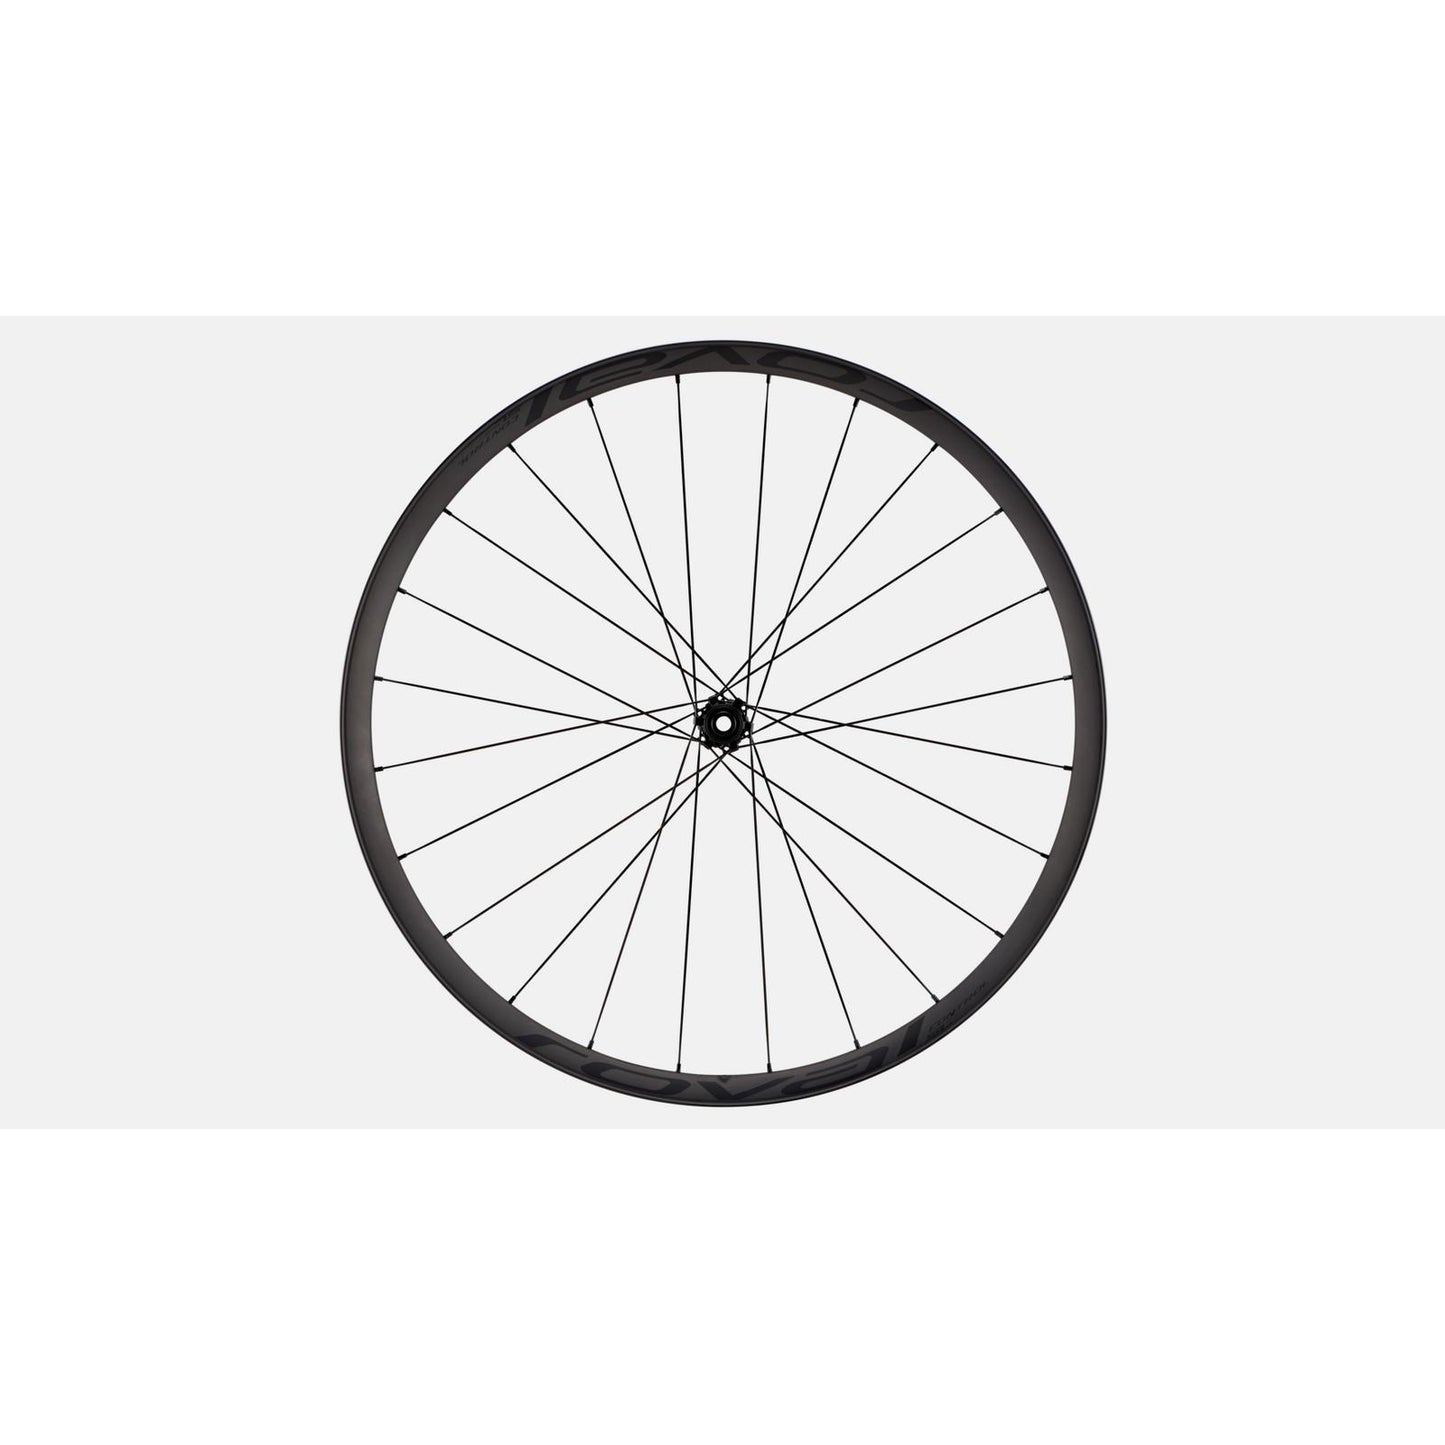 Specialized Roval Control SL 29 6B XD Wheelset - Bicycle Rims - Bicycle Warehouse